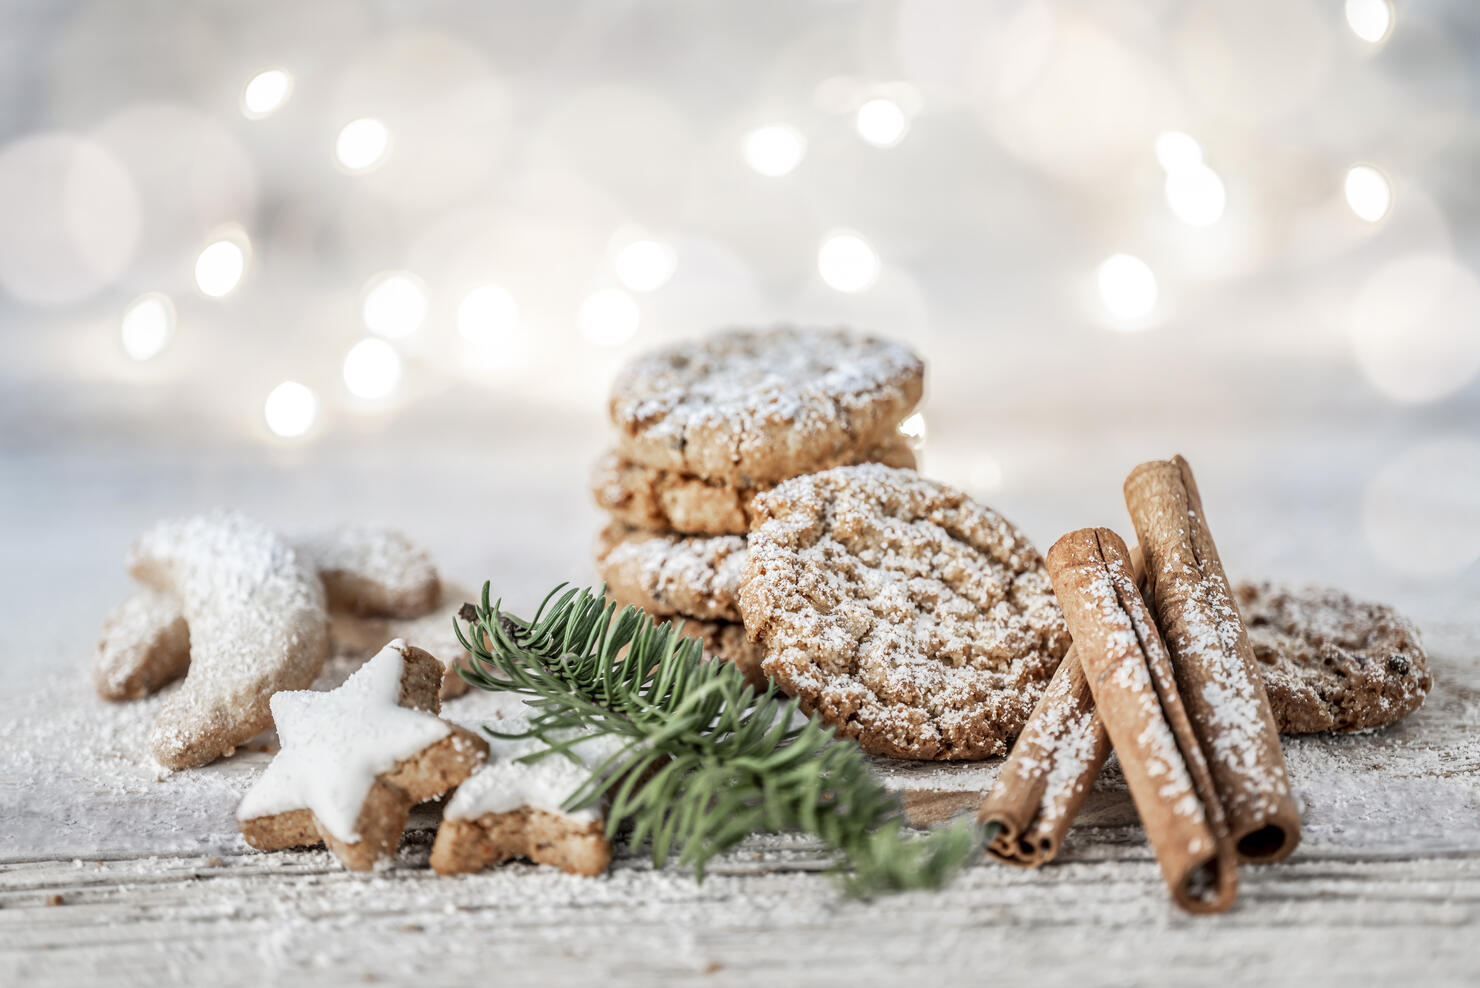 Vegan oatmeal cookies with powdered sugar, cinnamon sticks and cinnamon stars on a wooden table at christmas.